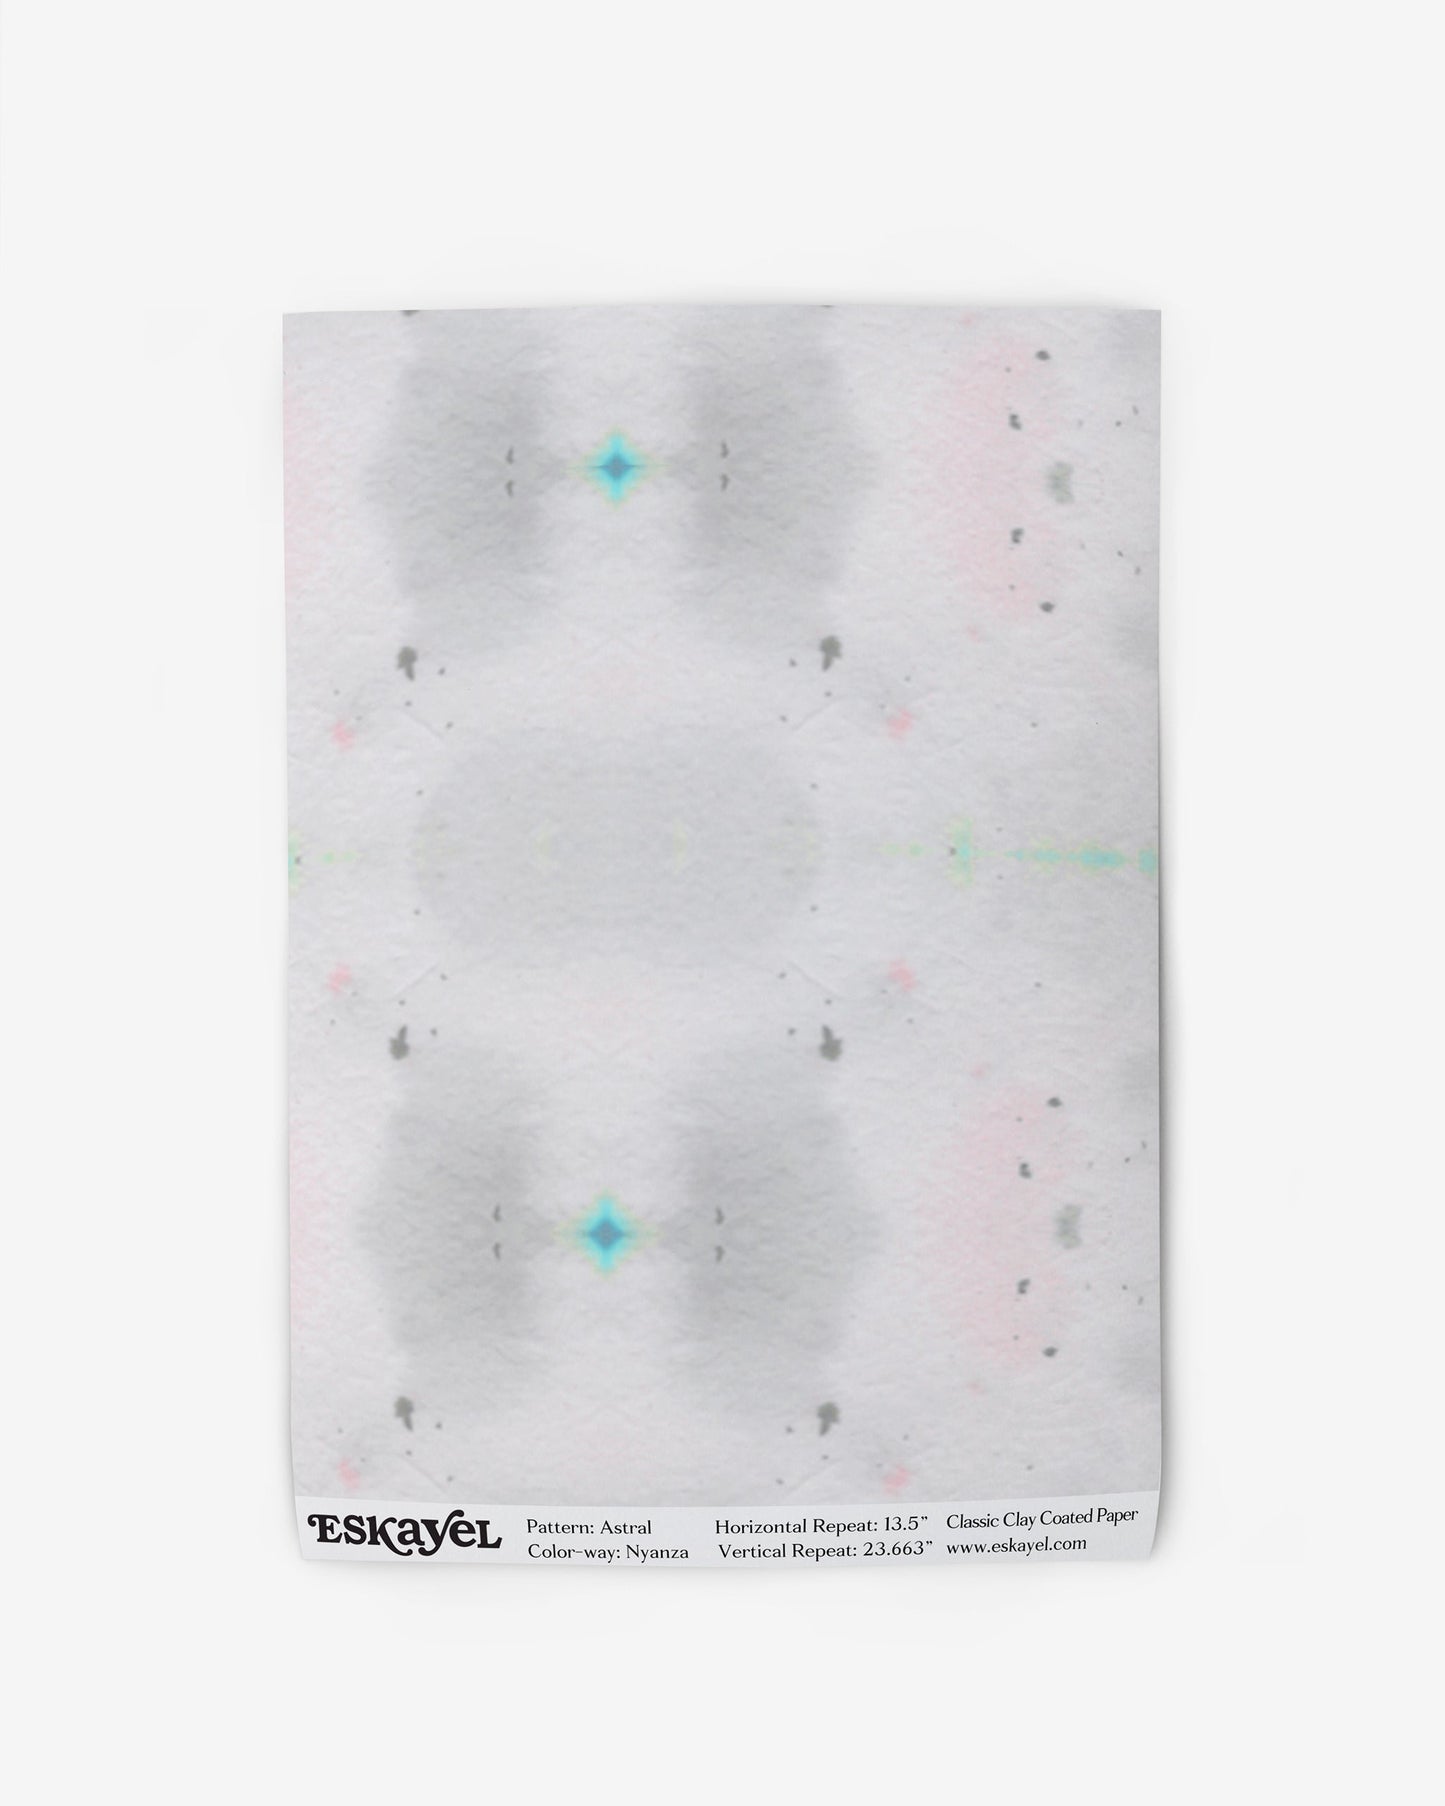 A white wallpaper with a pink, green, and blue pattern on it
Product Name: Astral Wallpaper Sample